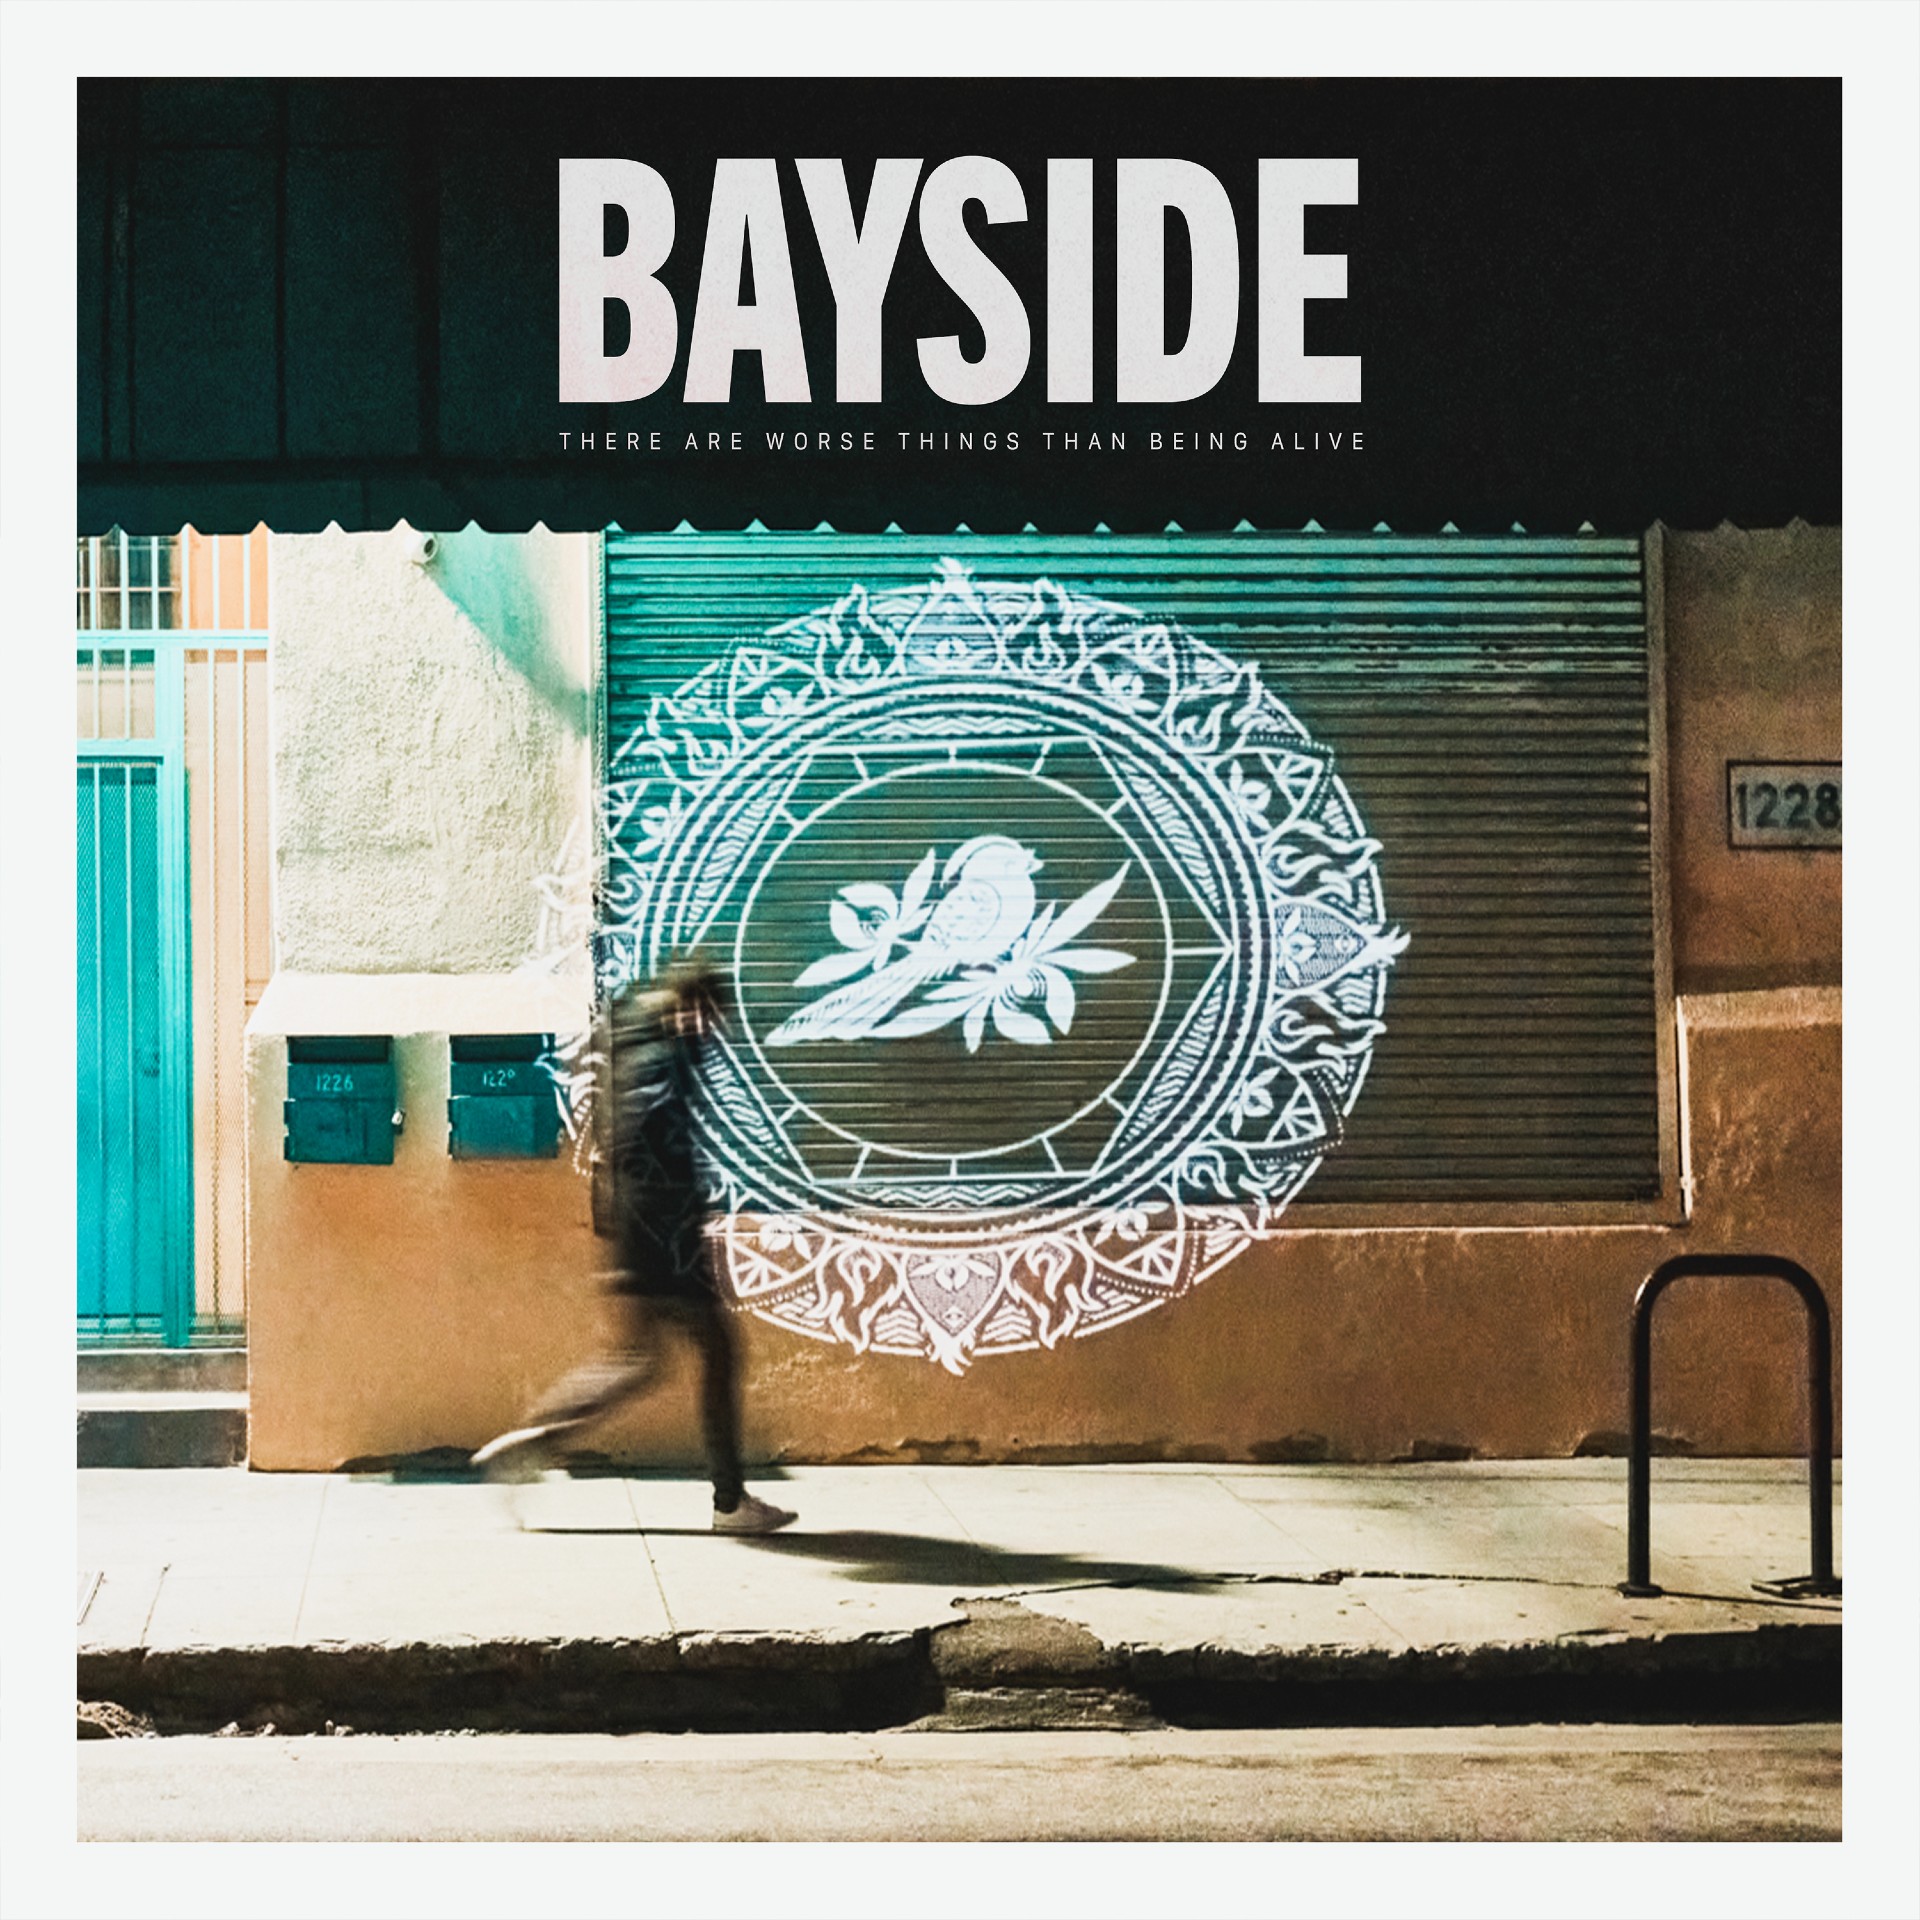 Bayside ‘There Are Worse Things Than Being Alive’ album artwork